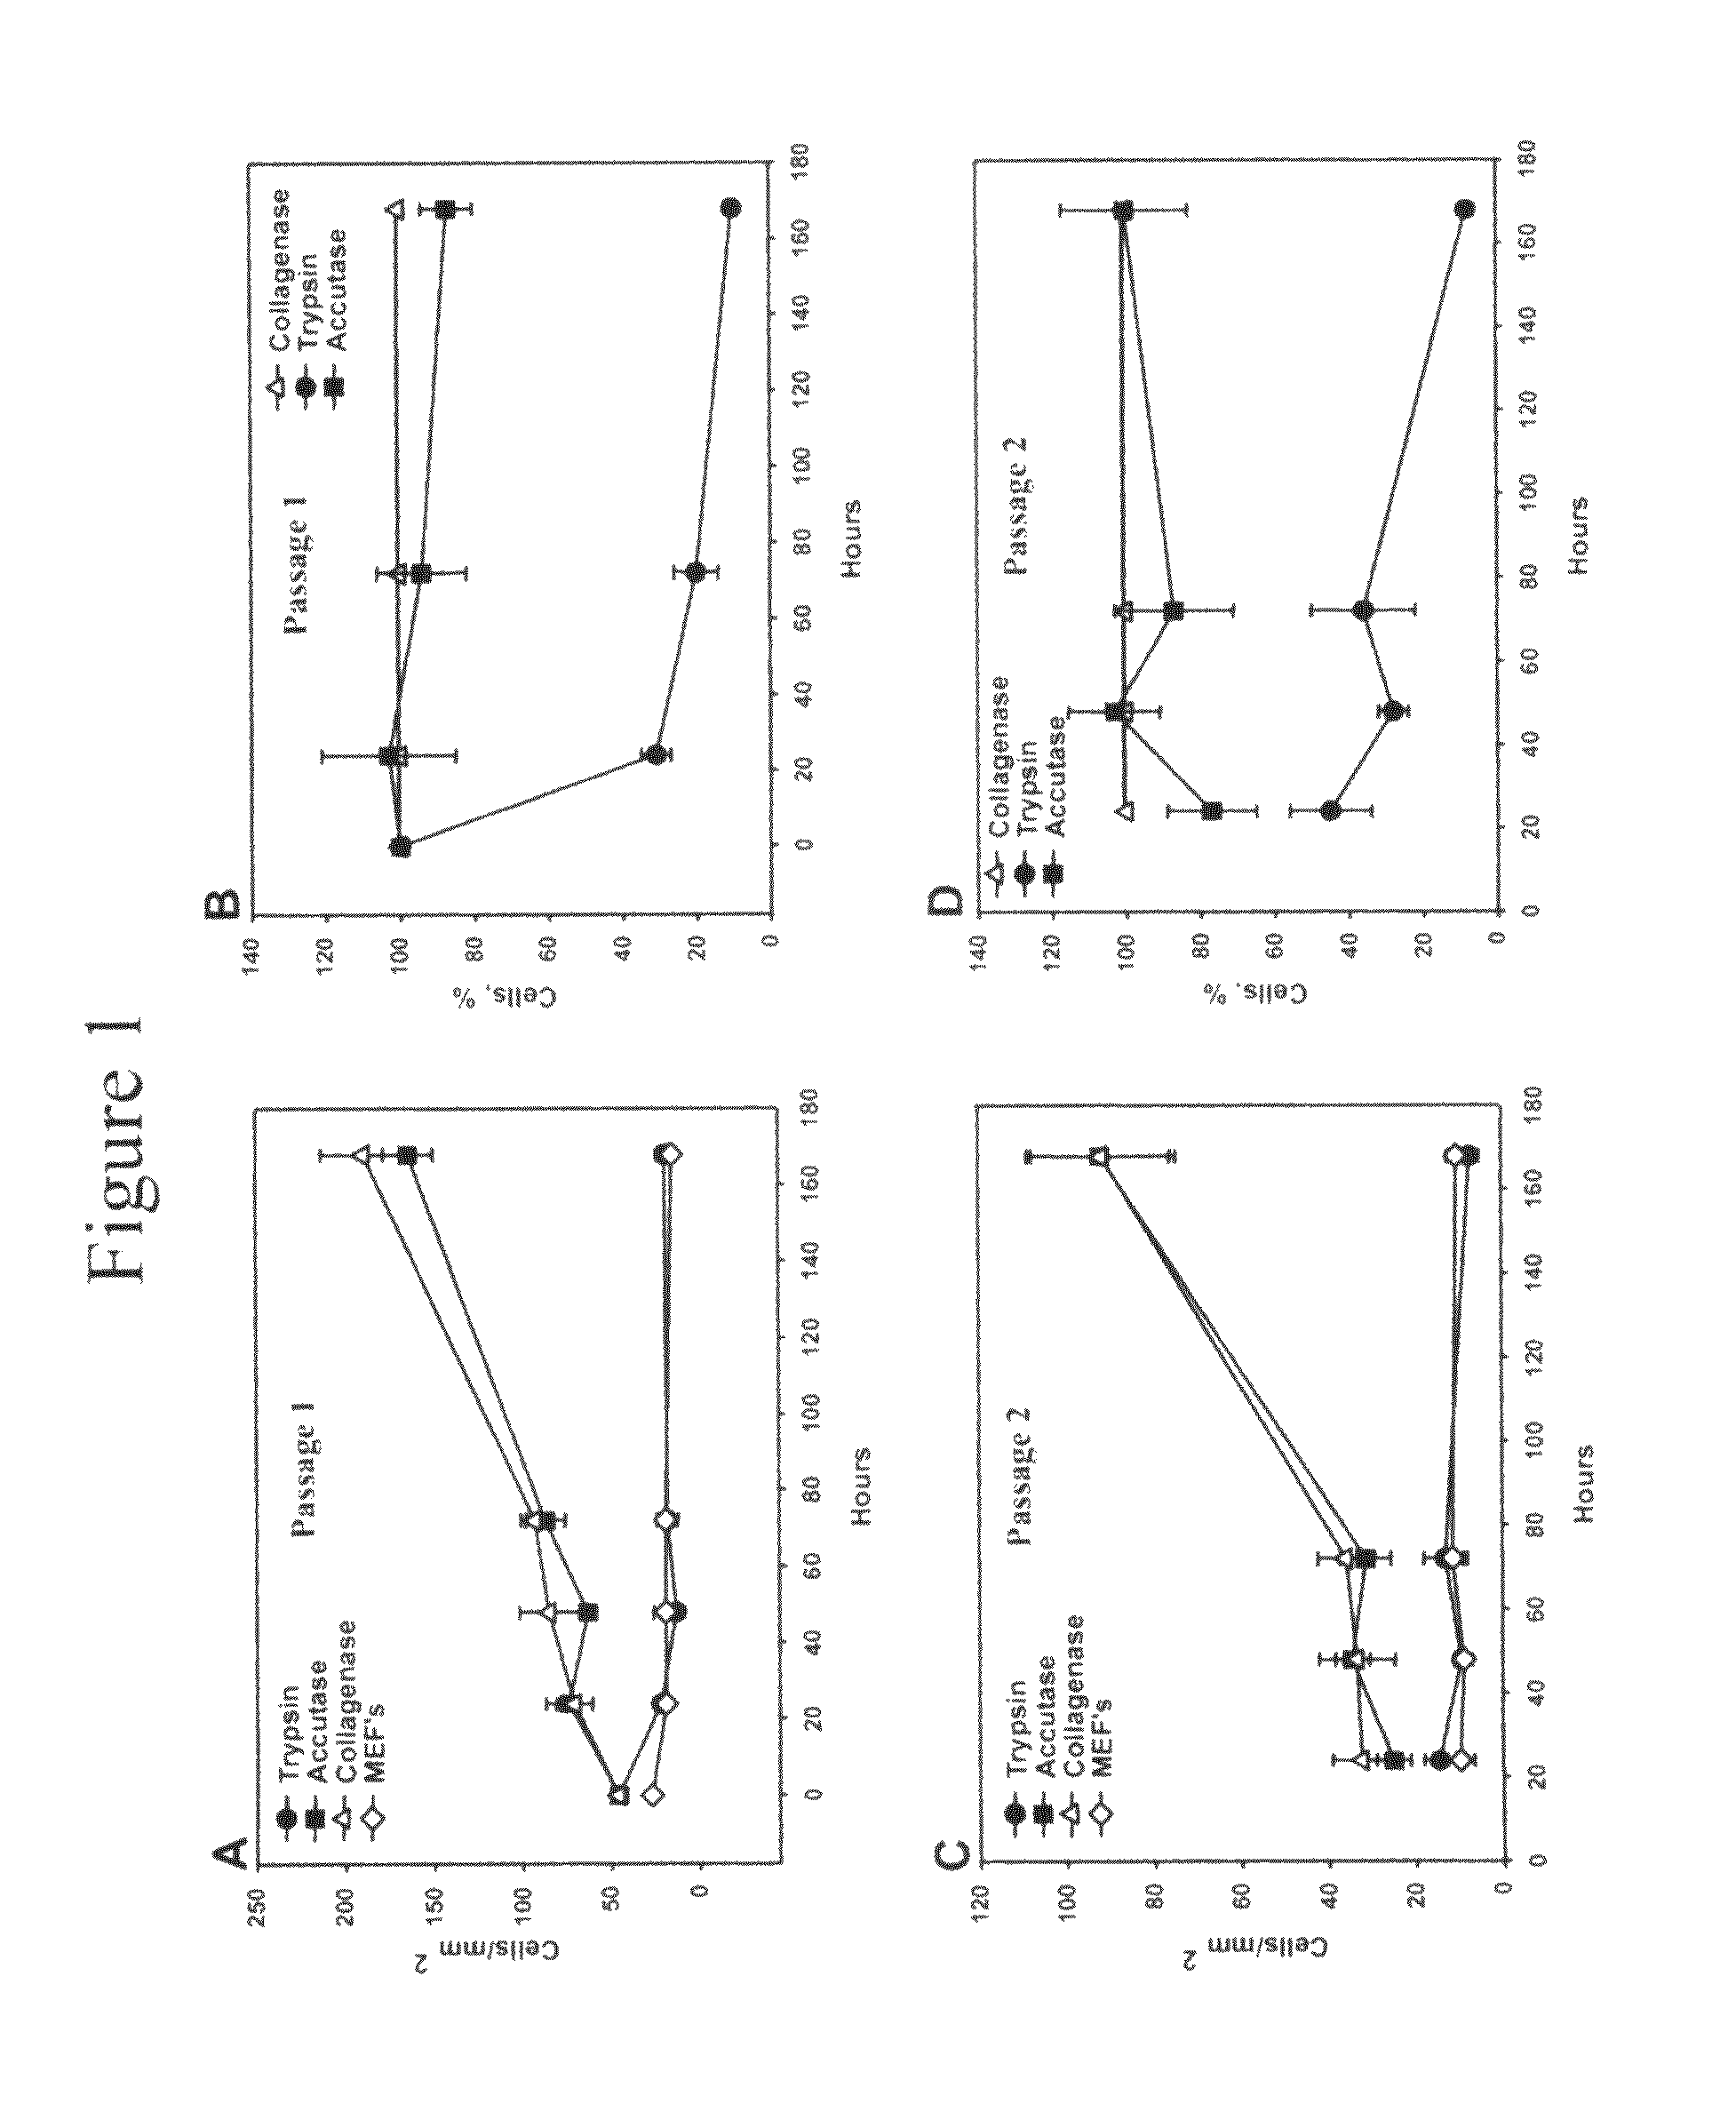 Methods for culture and production of single cell populations of human embryonic stem cells